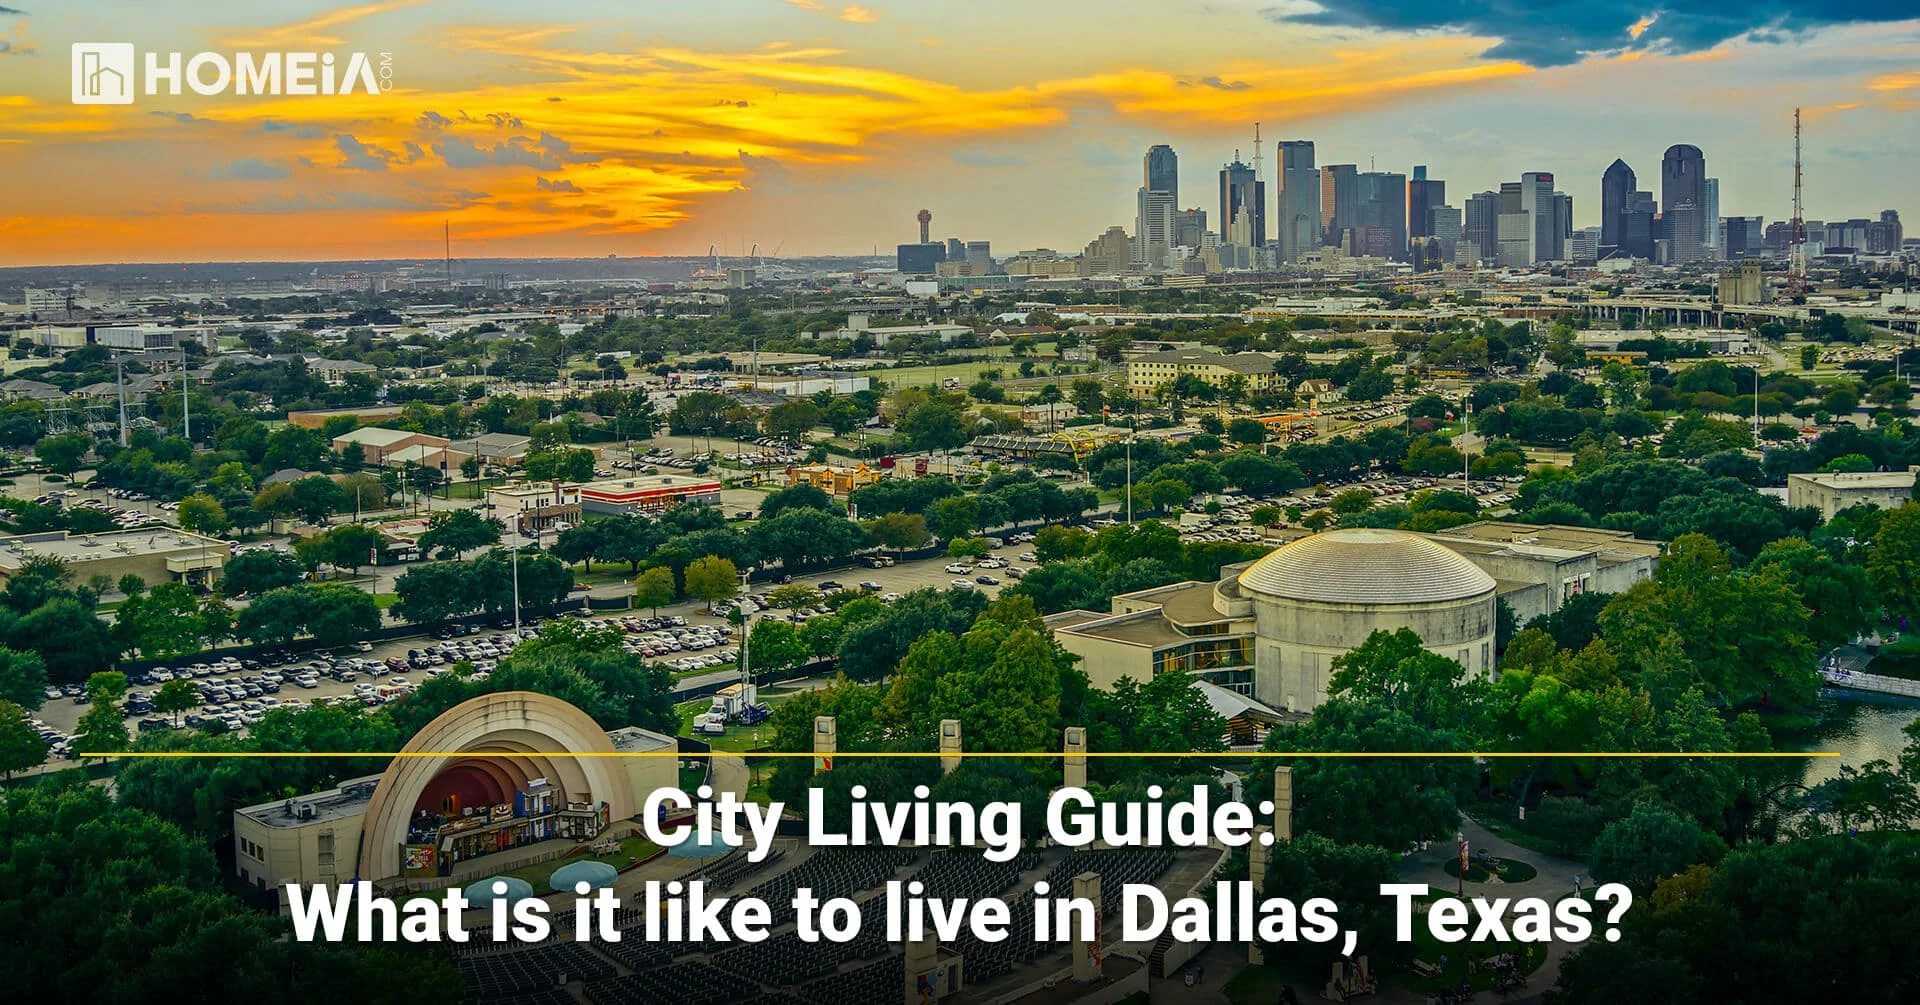 City Living Guide: What is it like to live in Dallas, Texas?